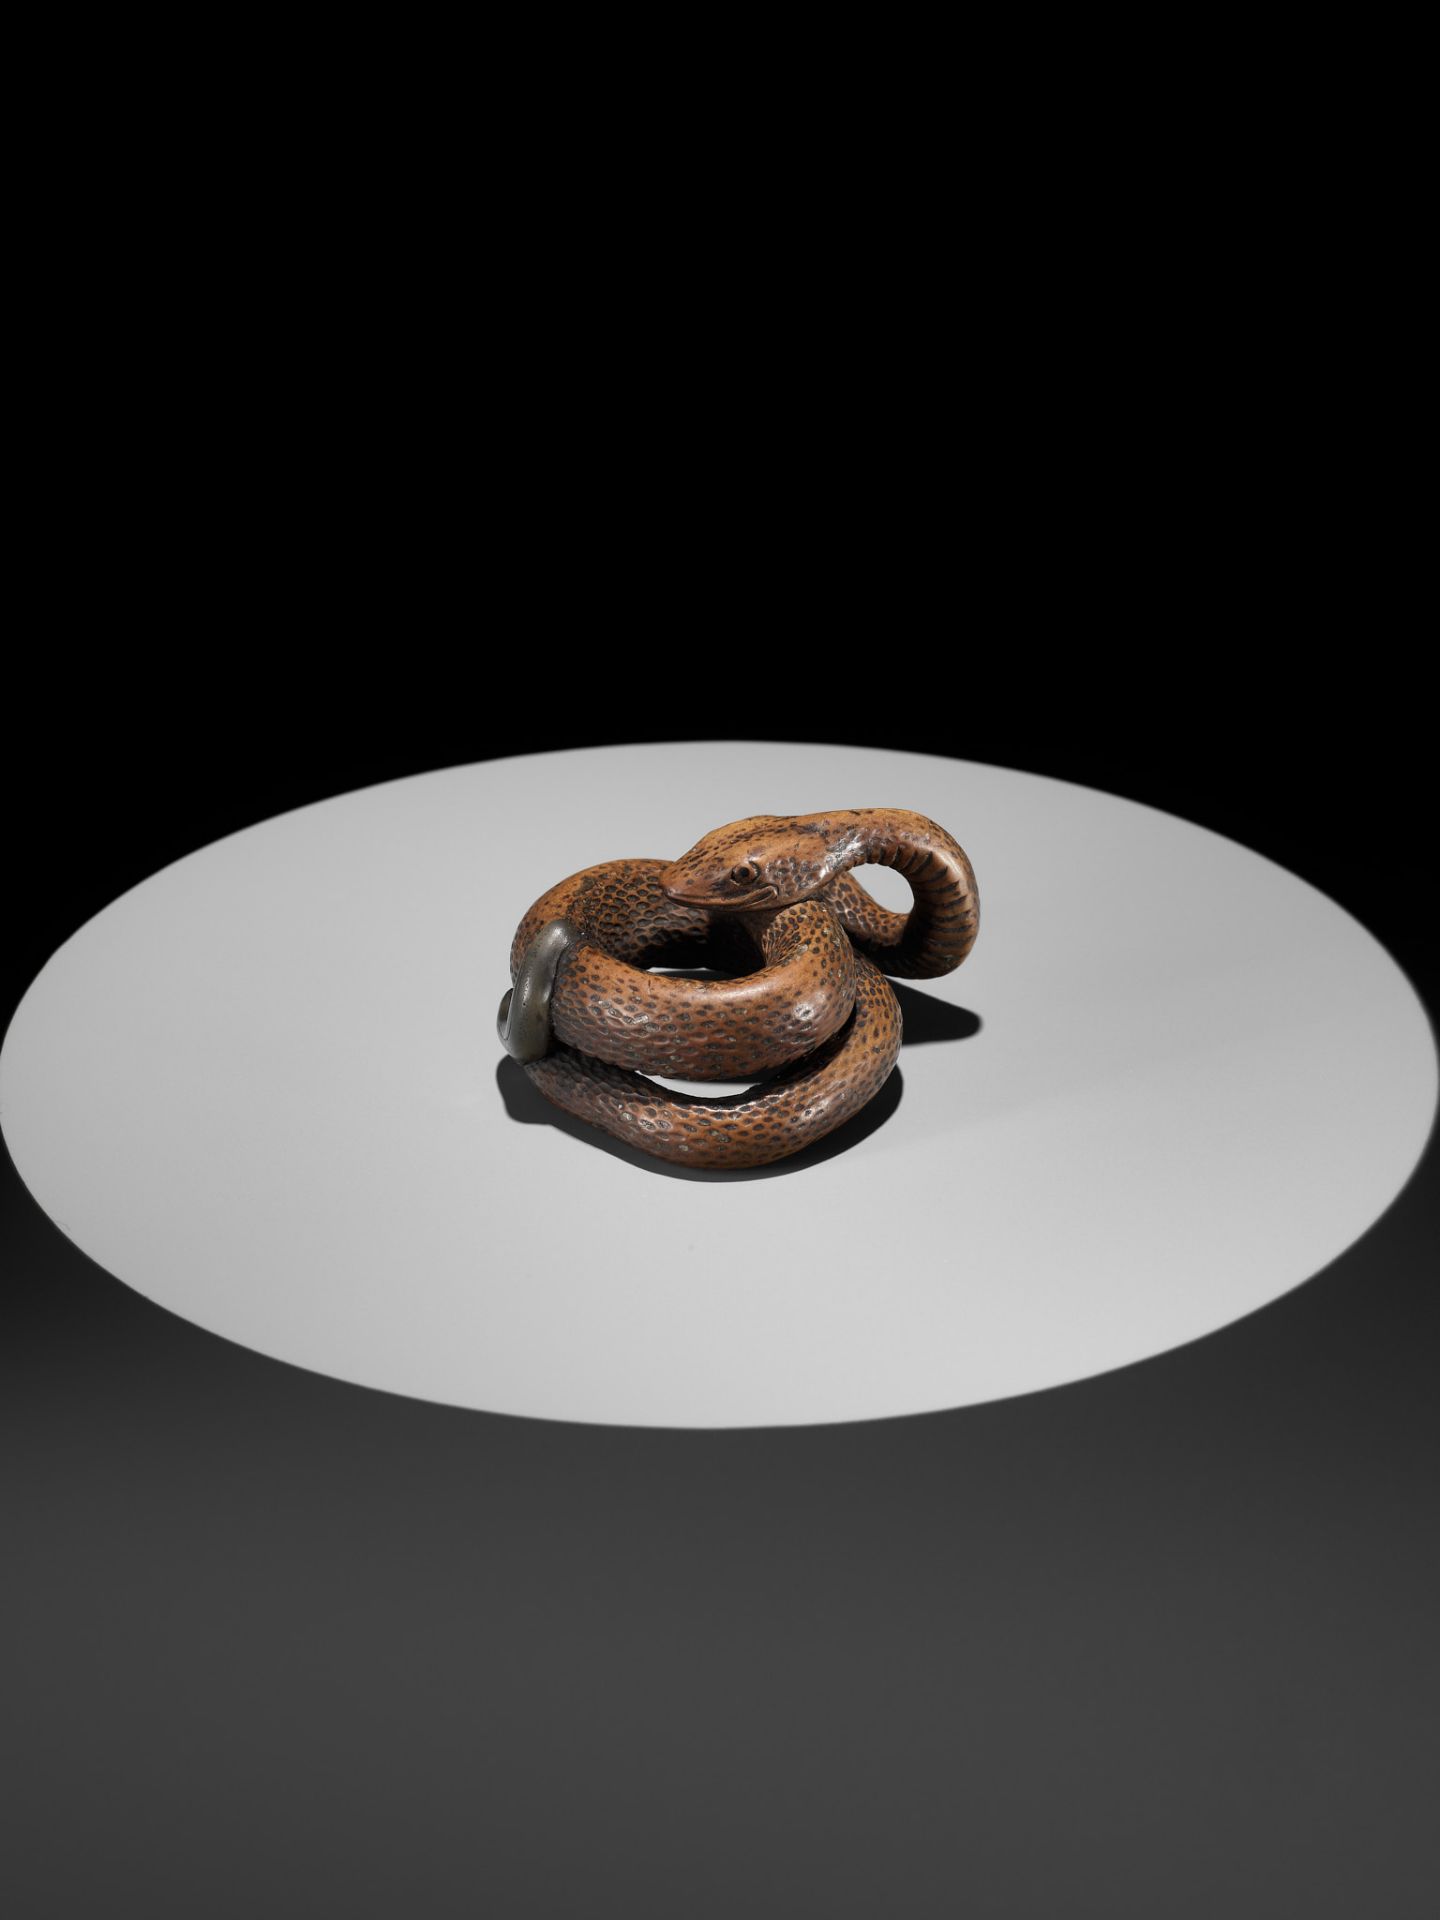 A LARGE AND POWERFUL WOOD NETSUKE OF A COILED SNAKE WITH AN INLAID SLUG BY TOMOKAZU - Image 4 of 13